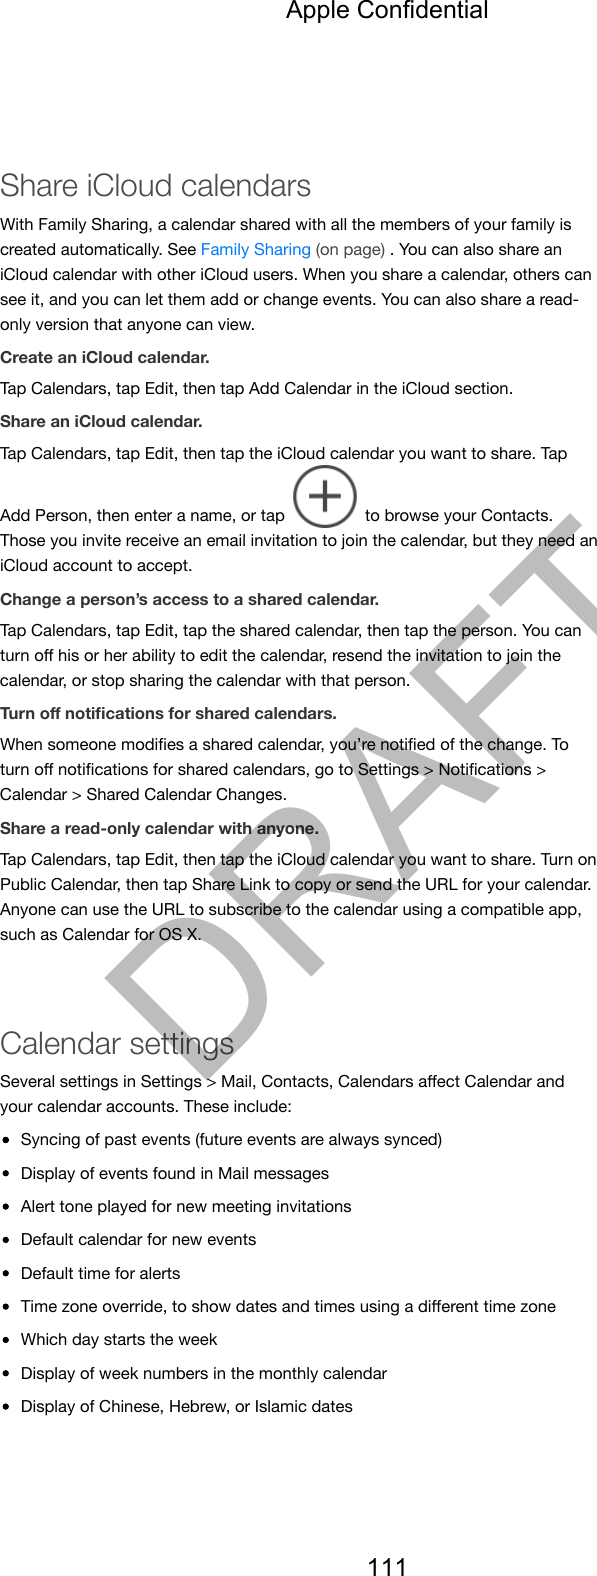 Share iCloud calendarsWith Family Sharing, a calendar shared with all the members of your family iscreated automatically. See Family Sharing (on page) . You can also share aniCloud calendar with other iCloud users. When you share a calendar, others cansee it, and you can let them add or change events. You can also share a read-only version that anyone can view.Create an iCloud calendar.Tap Calendars, tap Edit, then tap Add Calendar in the iCloud section.Share an iCloud calendar.Tap Calendars, tap Edit, then tap the iCloud calendar you want to share. TapAdd Person, then enter a name, or tap   to browse your Contacts.Those you invite receive an email invitation to join the calendar, but they need aniCloud account to accept.Change a person’s access to a shared calendar.Tap Calendars, tap Edit, tap the shared calendar, then tap the person. You canturn oﬀ his or her ability to edit the calendar, resend the invitation to join thecalendar, or stop sharing the calendar with that person.Turn oﬀ notiﬁcations for shared calendars.When someone modiﬁes a shared calendar, you’re notiﬁed of the change. Toturn oﬀ notiﬁcations for shared calendars, go to Settings &gt; Notiﬁcations &gt;Calendar &gt; Shared Calendar Changes.Share a read-only calendar with anyone.Tap Calendars, tap Edit, then tap the iCloud calendar you want to share. Turn onPublic Calendar, then tap Share Link to copy or send the URL for your calendar.Anyone can use the URL to subscribe to the calendar using a compatible app,such as Calendar for OS X.Calendar settingsSeveral settings in Settings &gt; Mail, Contacts, Calendars aﬀect Calendar andyour calendar accounts. These include:Syncing of past events (future events are always synced)Display of events found in Mail messagesAlert tone played for new meeting invitationsDefault calendar for new eventsDefault time for alertsTime zone override, to show dates and times using a diﬀerent time zoneWhich day starts the weekDisplay of week numbers in the monthly calendarDisplay of Chinese, Hebrew, or Islamic datesApple Confidential111DRAFT